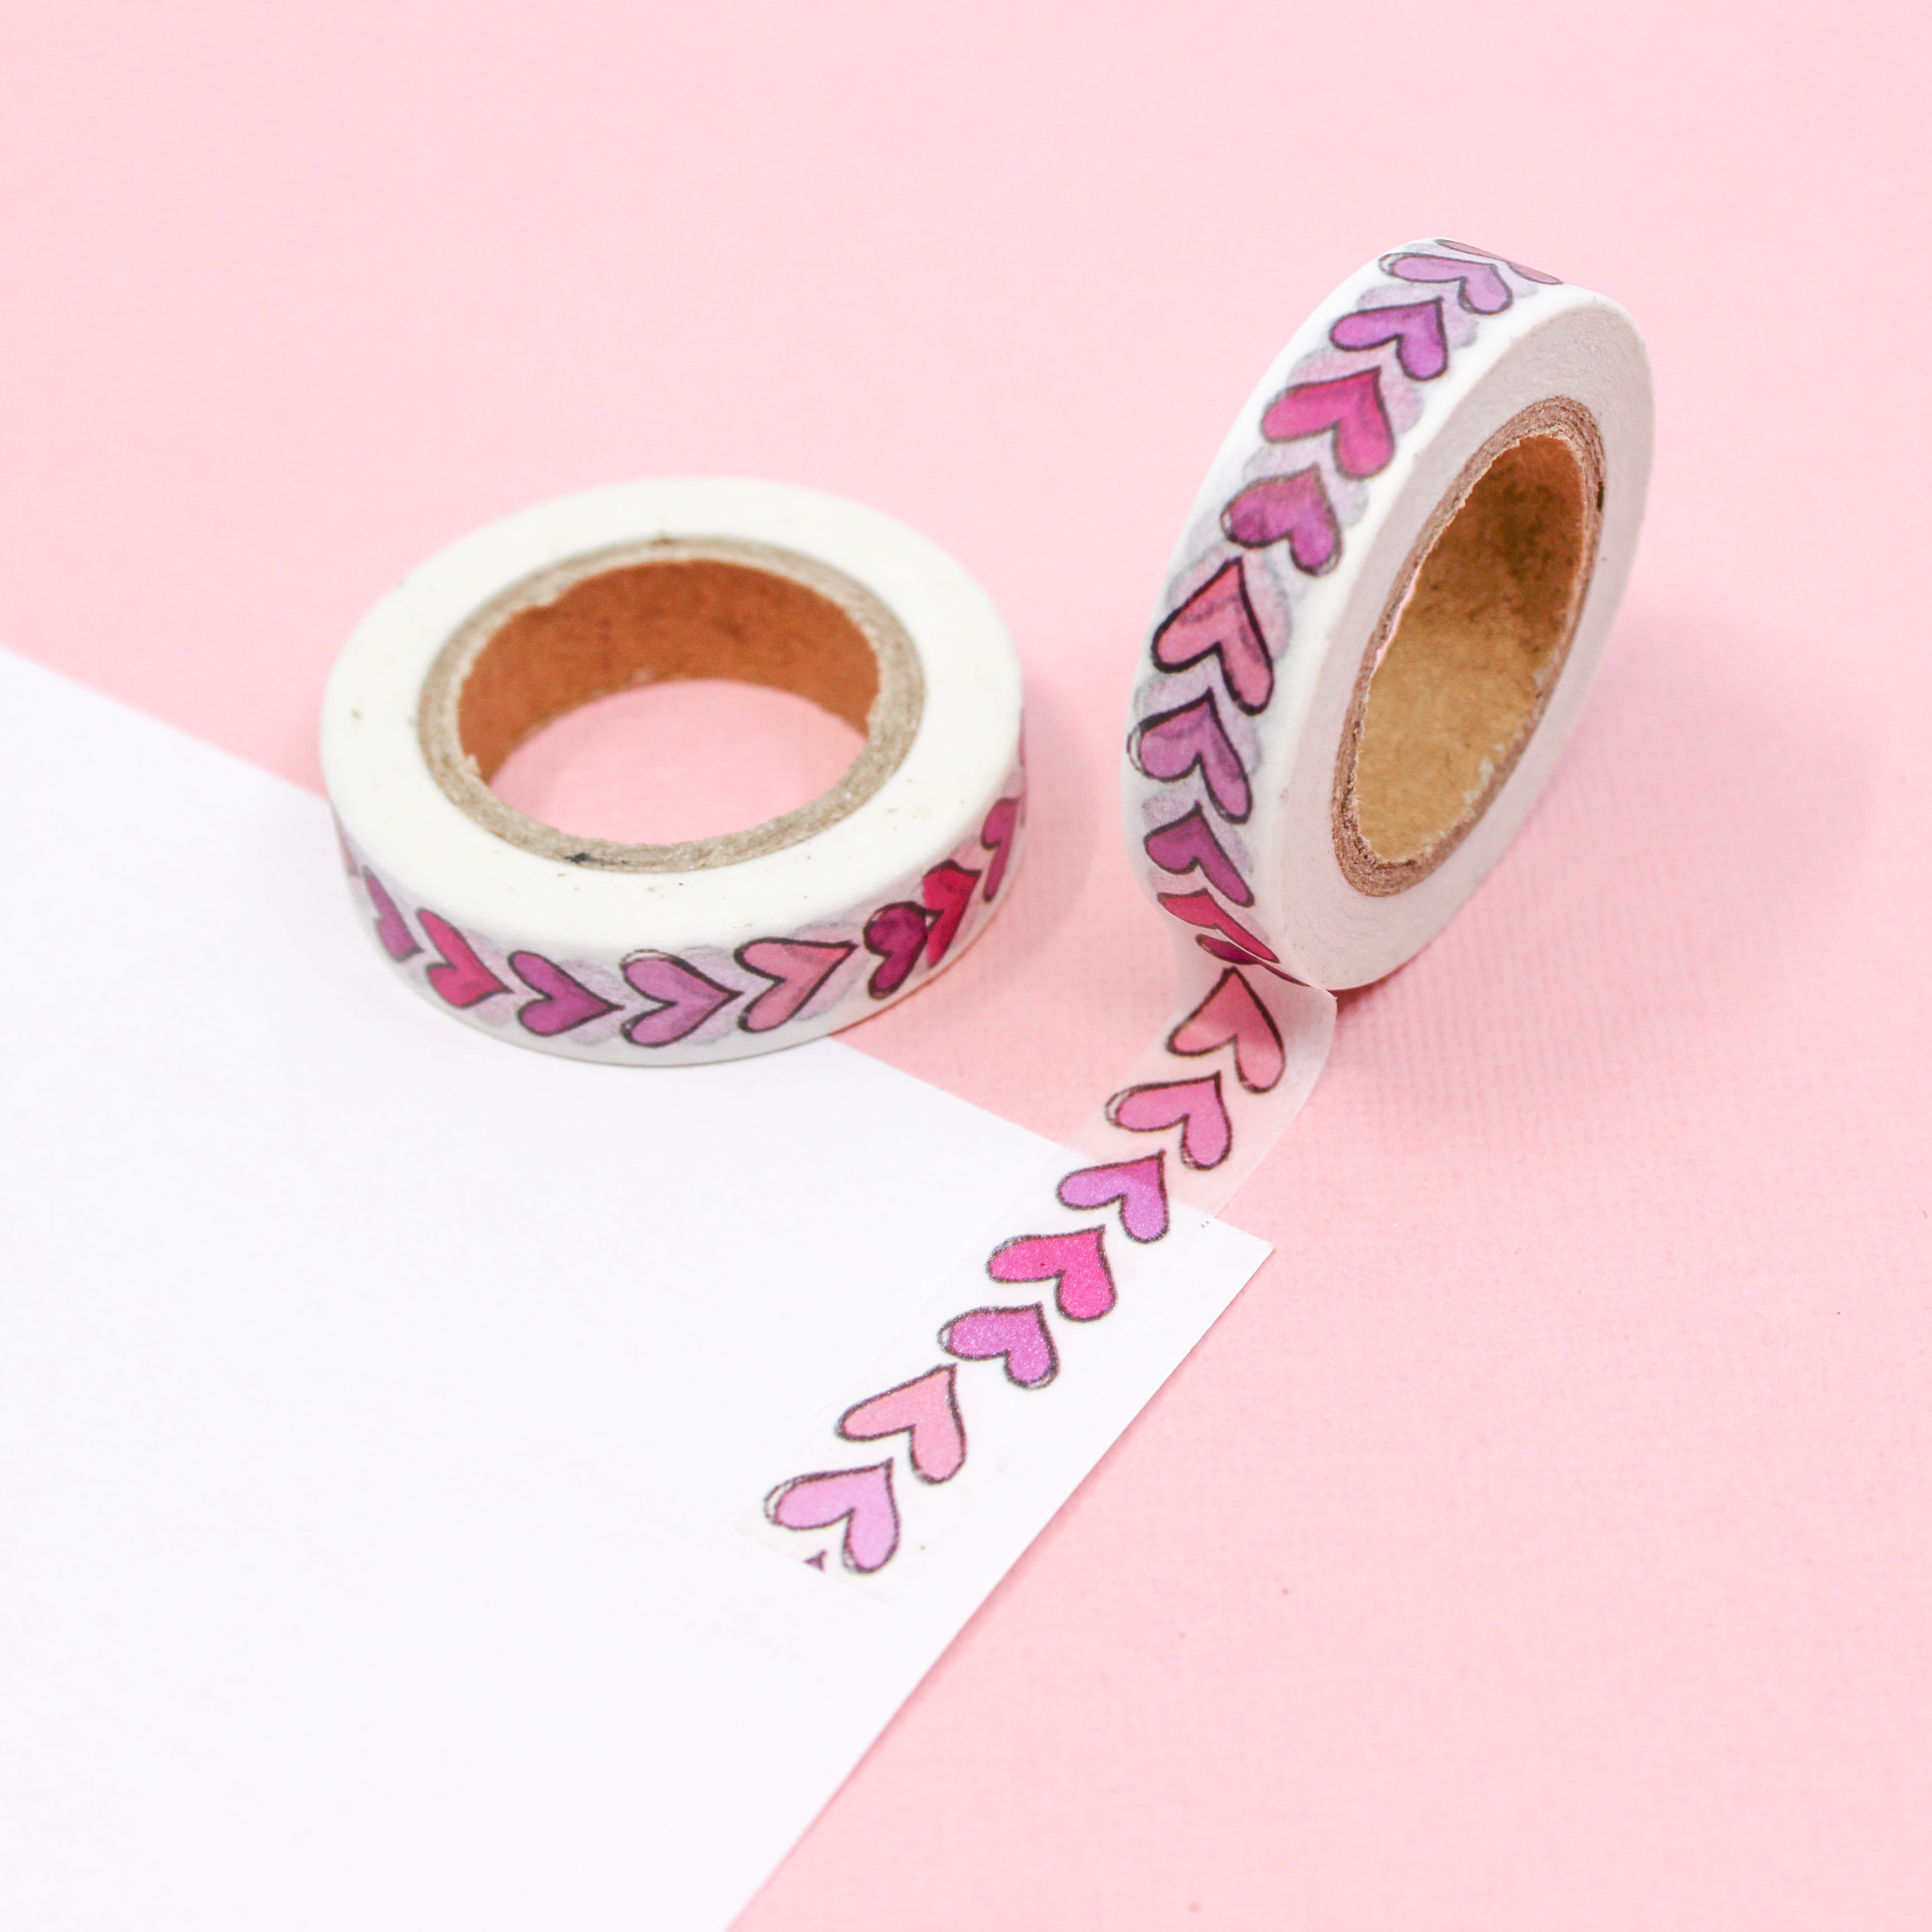 This is pink hand drawn hearts pattern washi tape from BBB Supplies Craft Shop